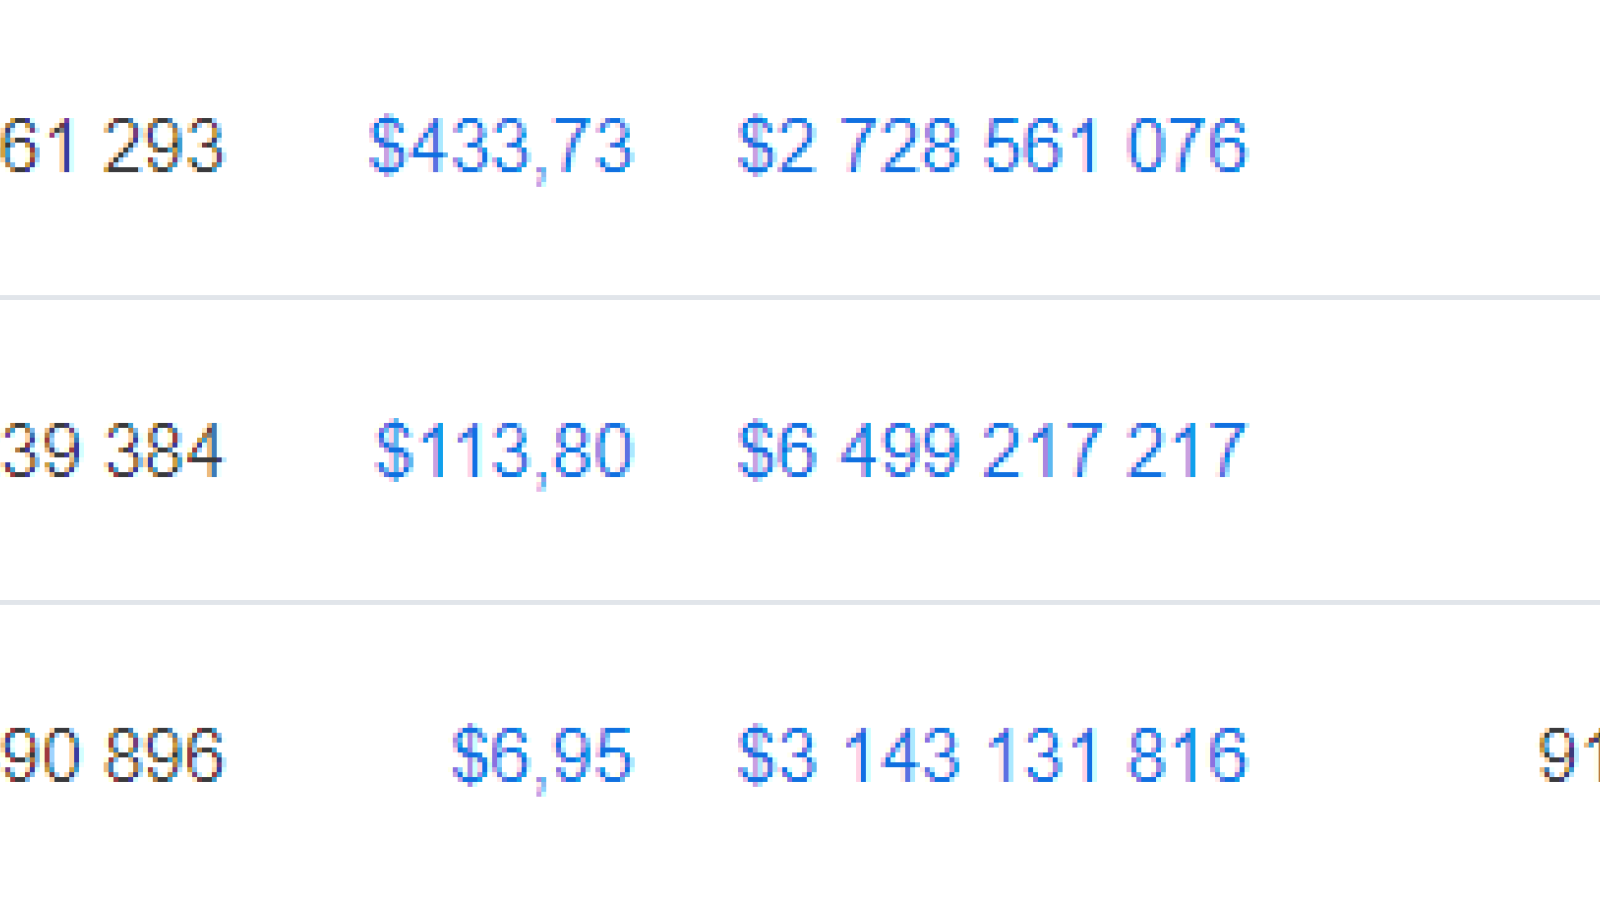 Litecoin (LTC) is the top gainer on the top 10 list